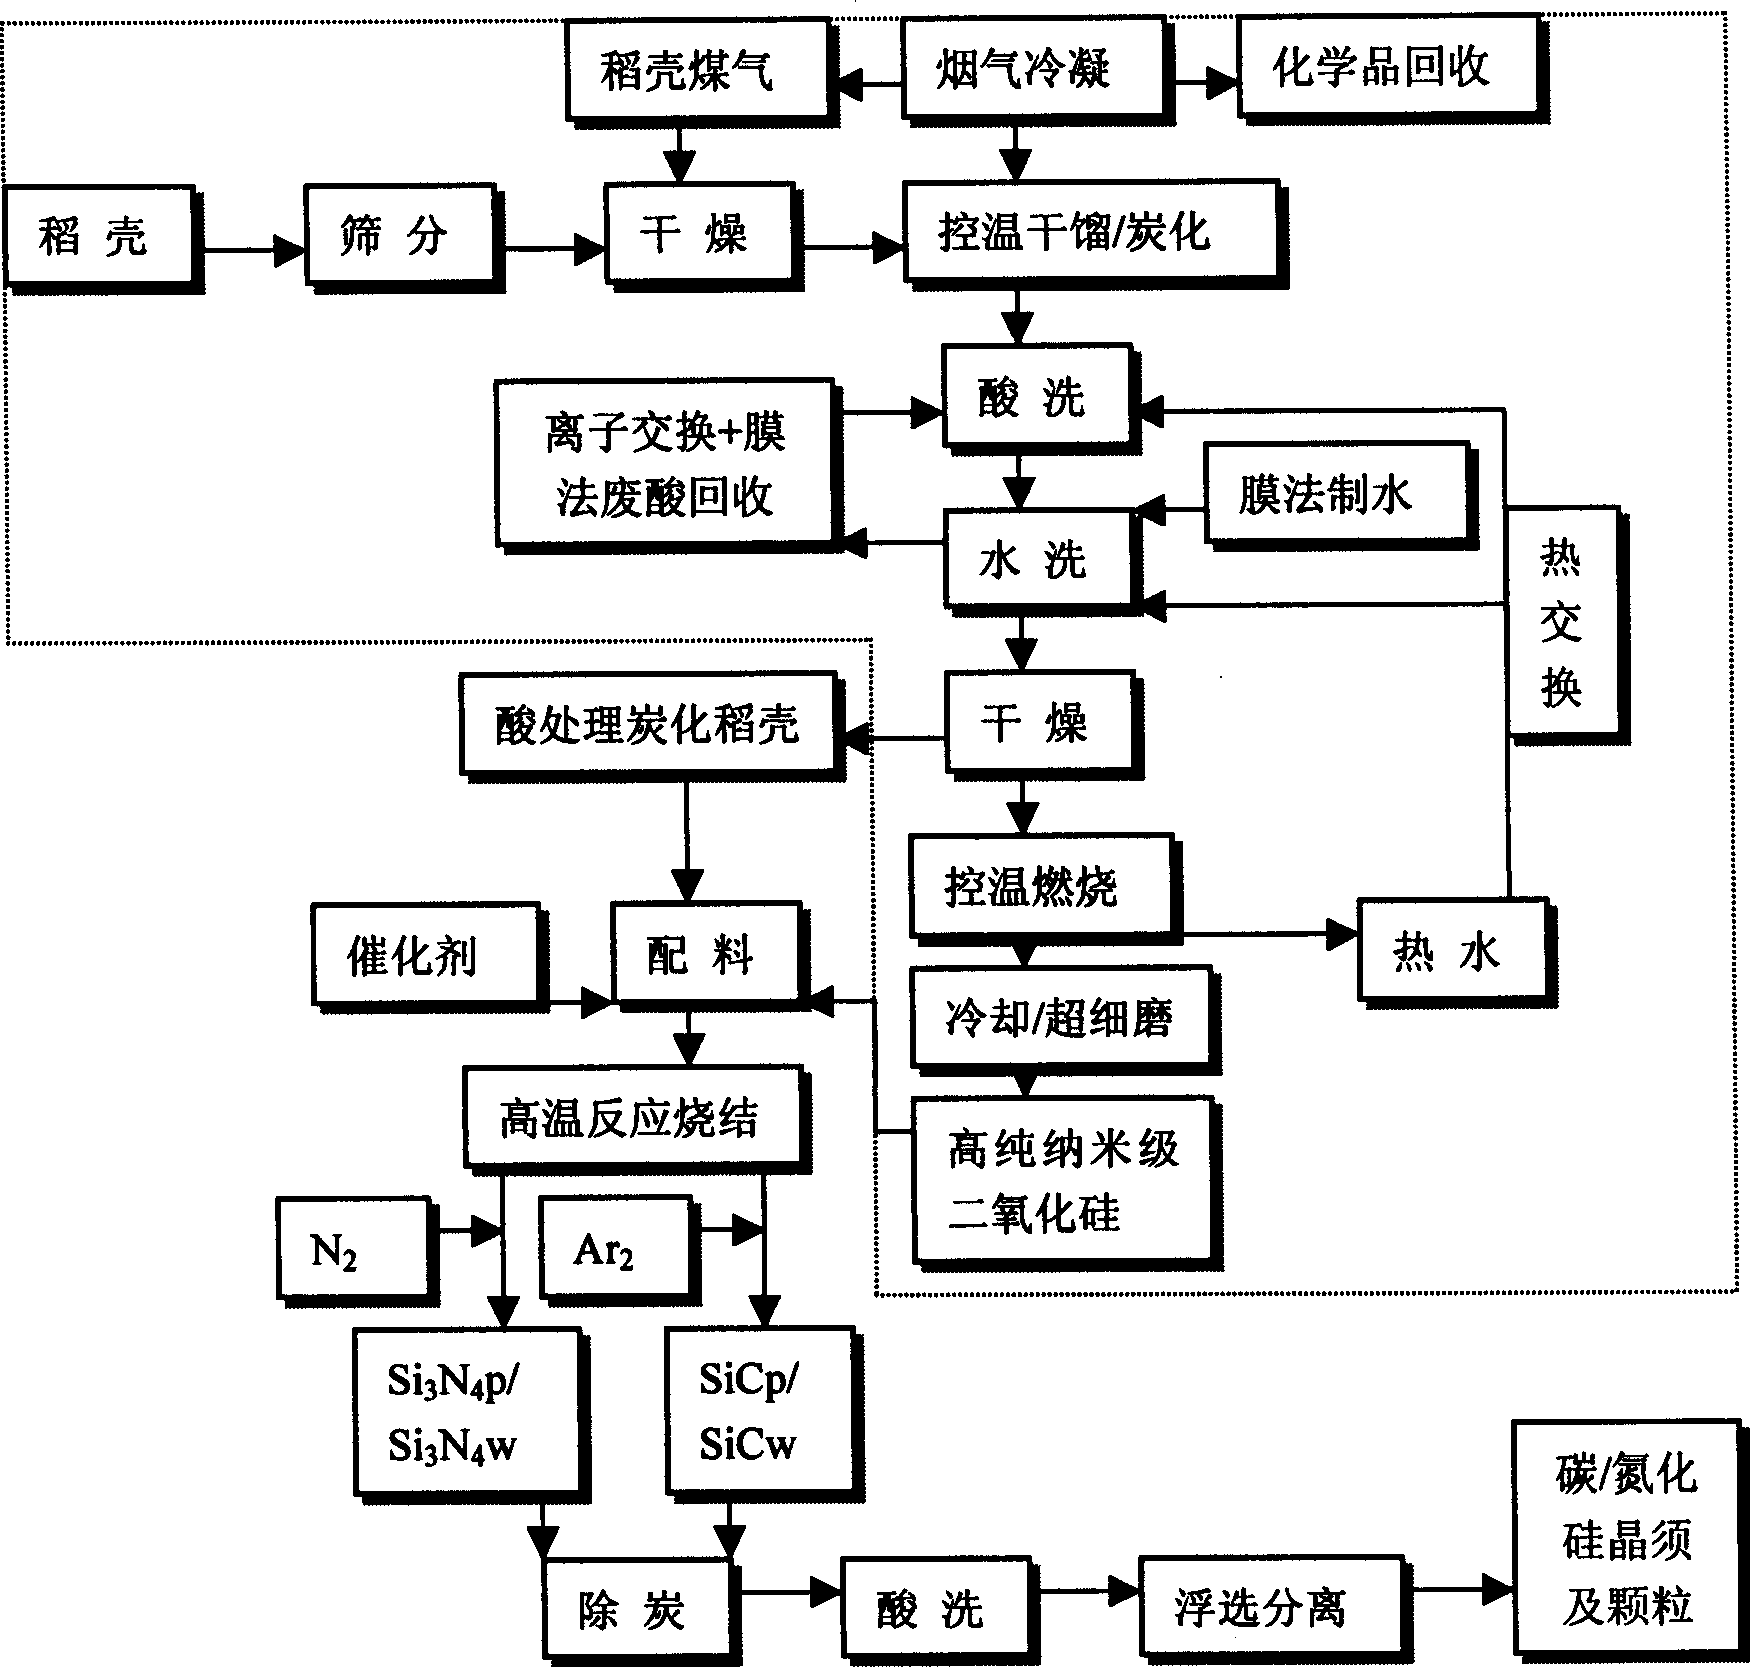 Process and apparatus for preparing high-purity silicon dioxide by utilizing rice hull